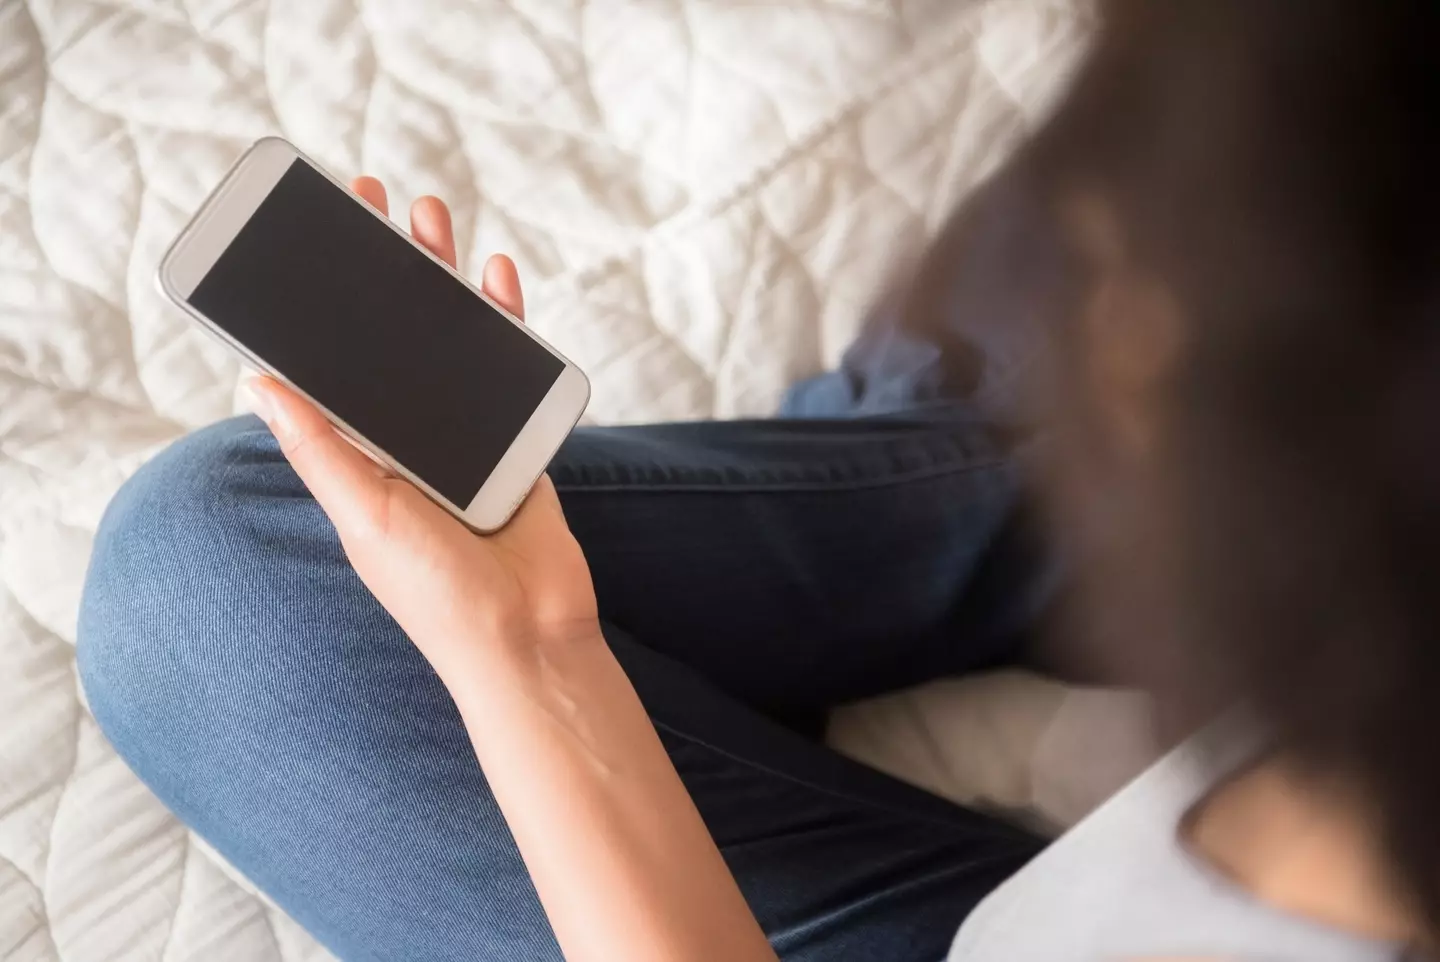 Avoiding texting back could be a sign you're not with the right person.